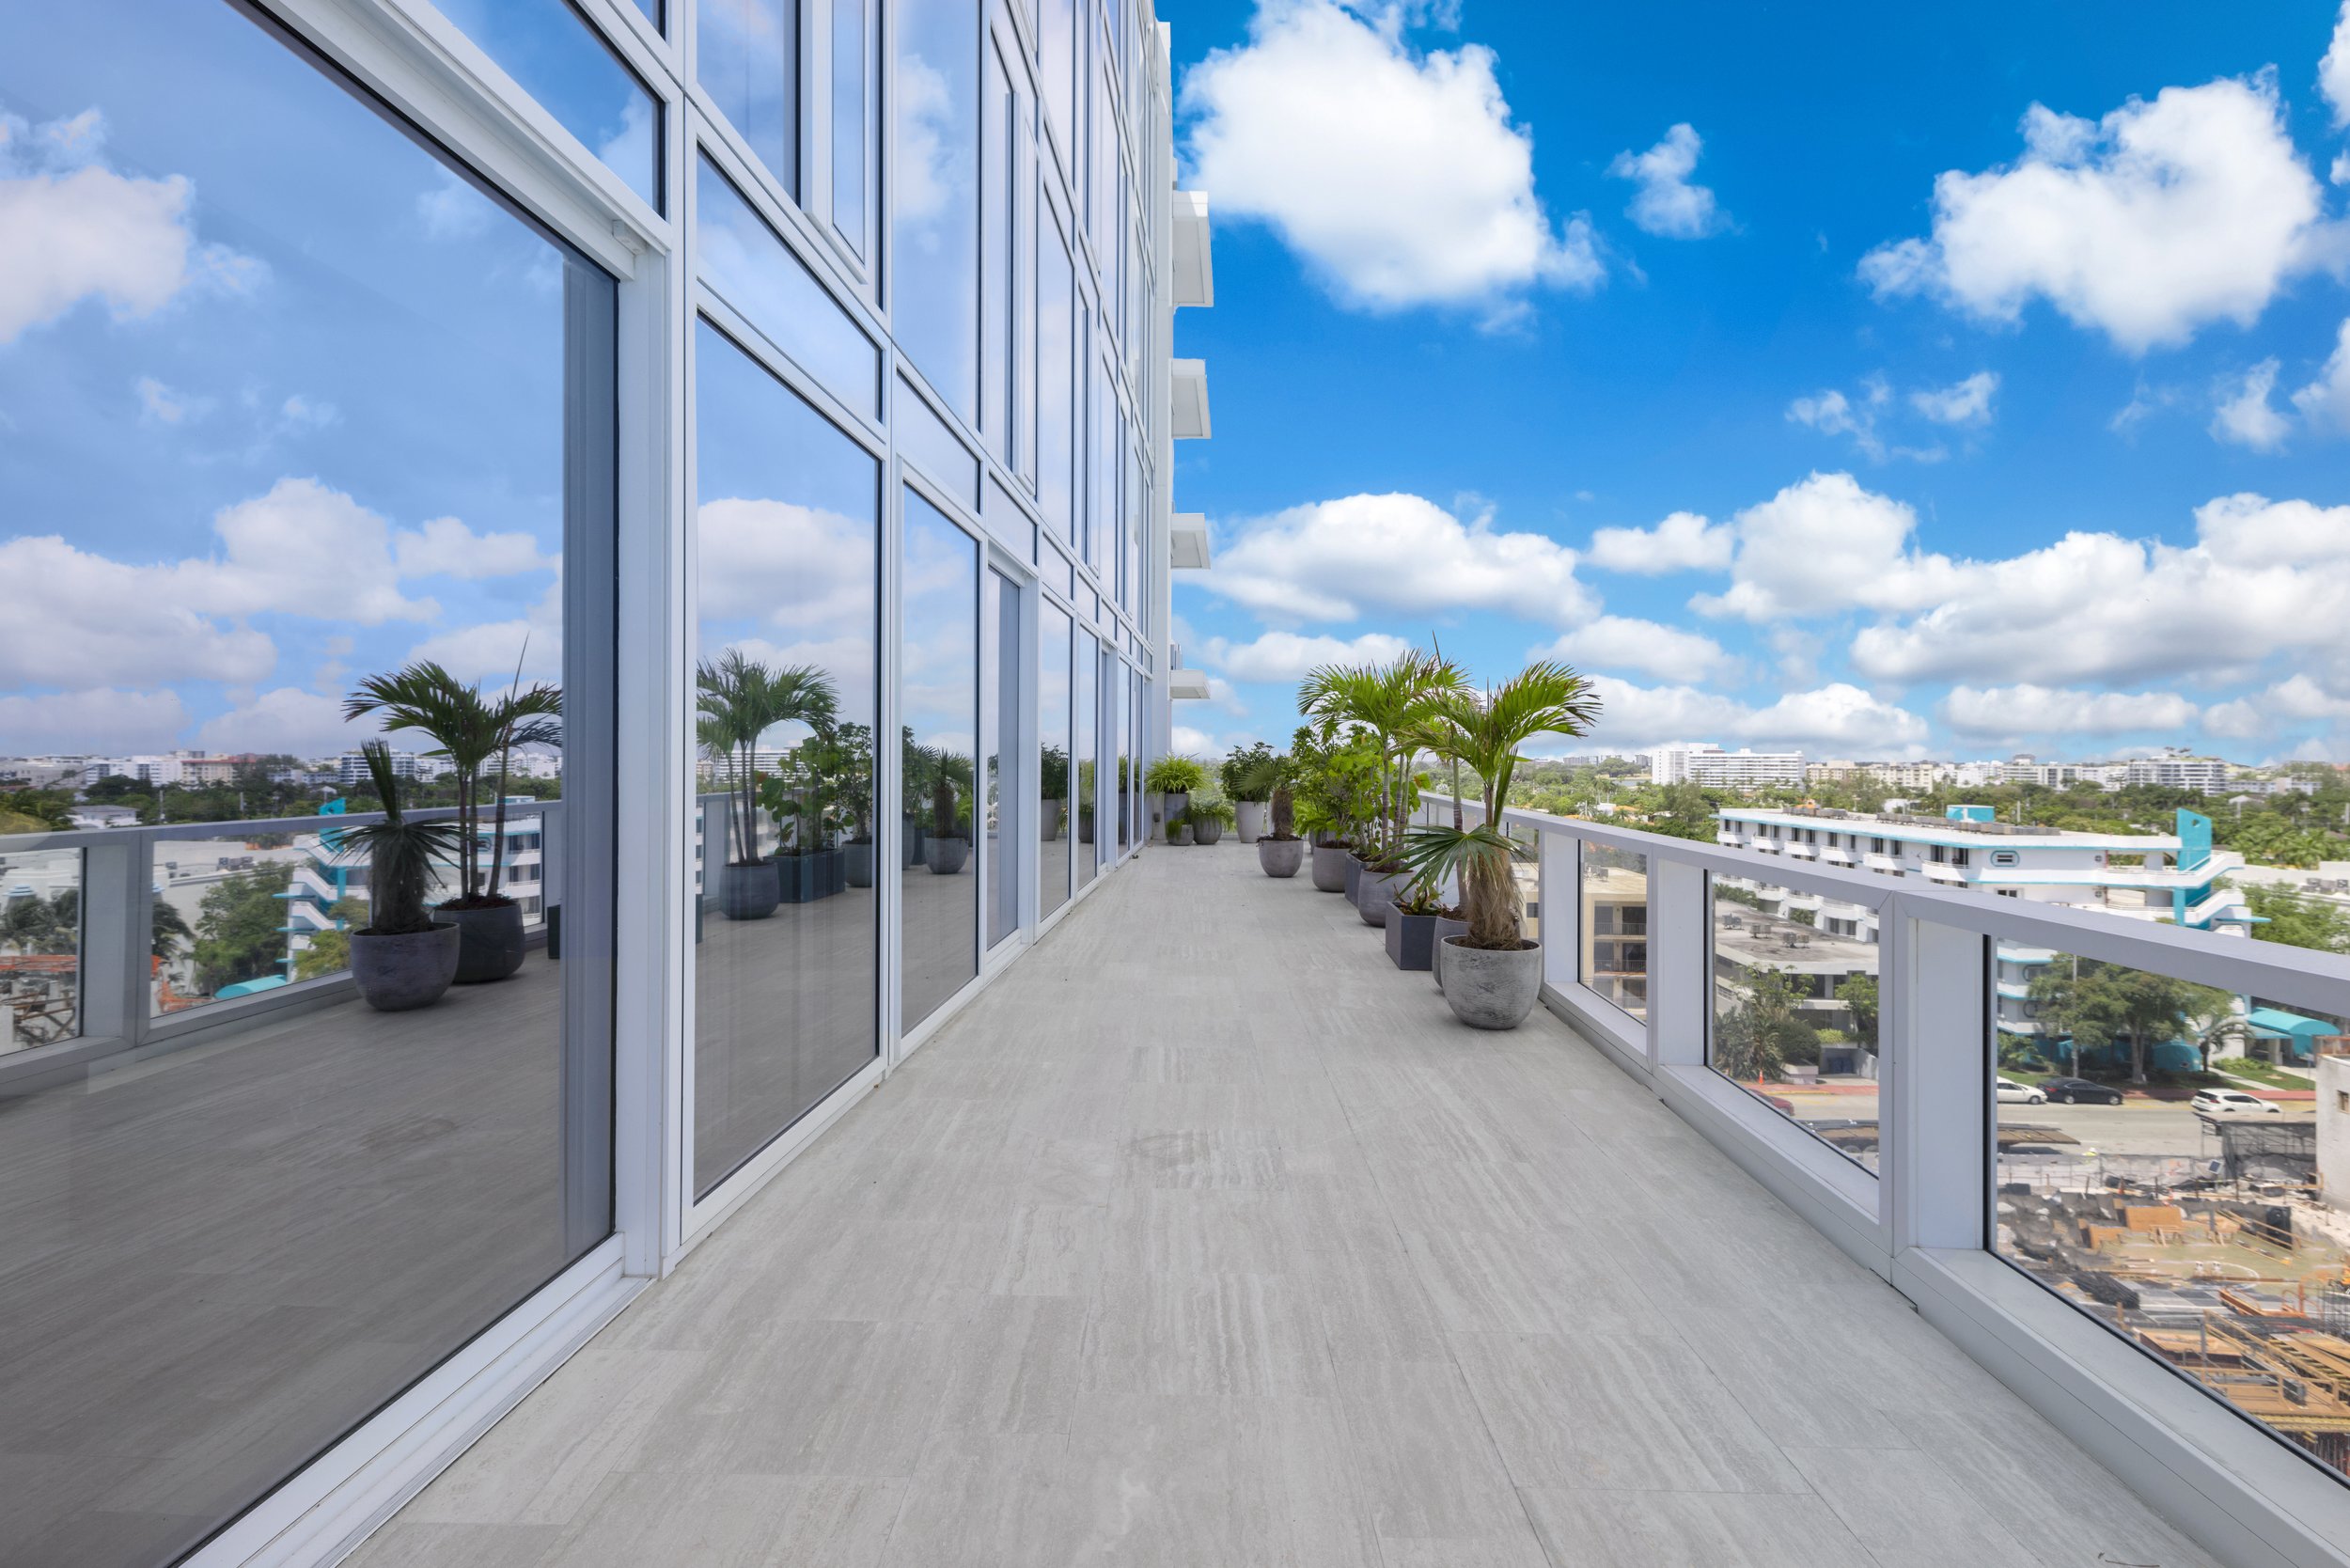 Check Out This Lavish Condo With Custom Wave Ceilings Asking $37 Million At Four Seasons at The Surf Club In Surfside 7.jpg